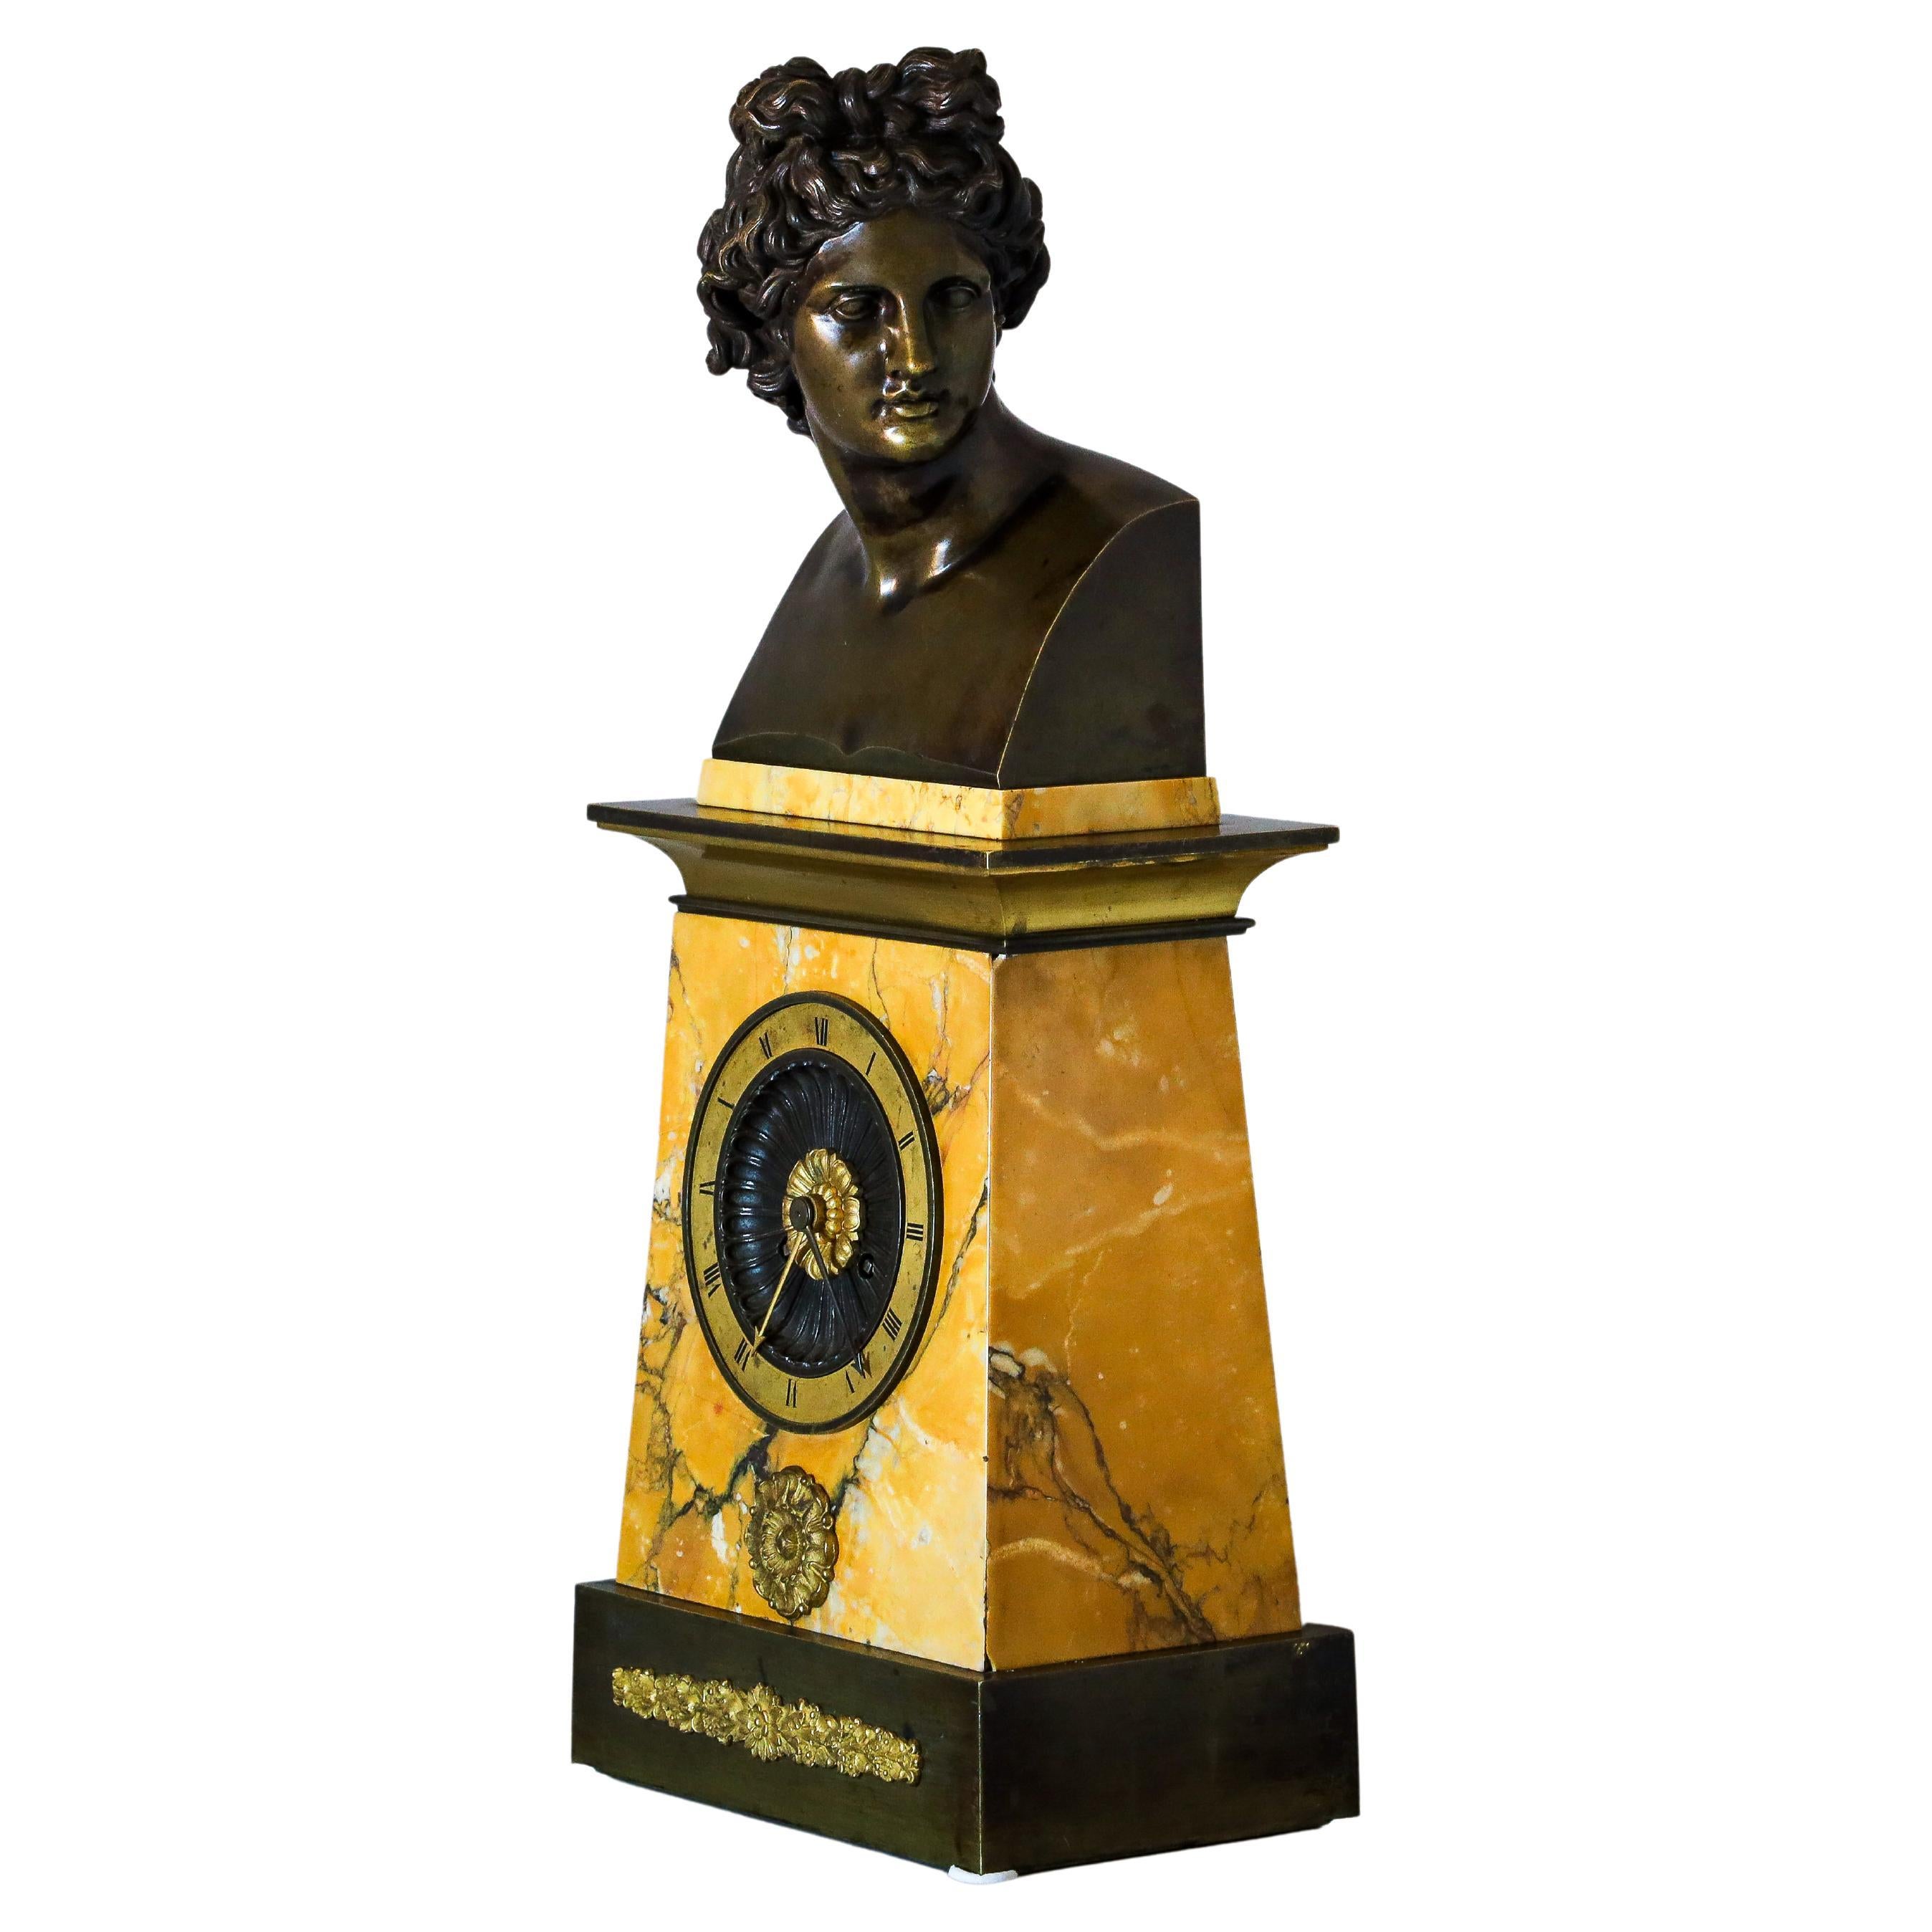 Charles X Pendule with Bust of Apollo Belvedere, France c. 1830